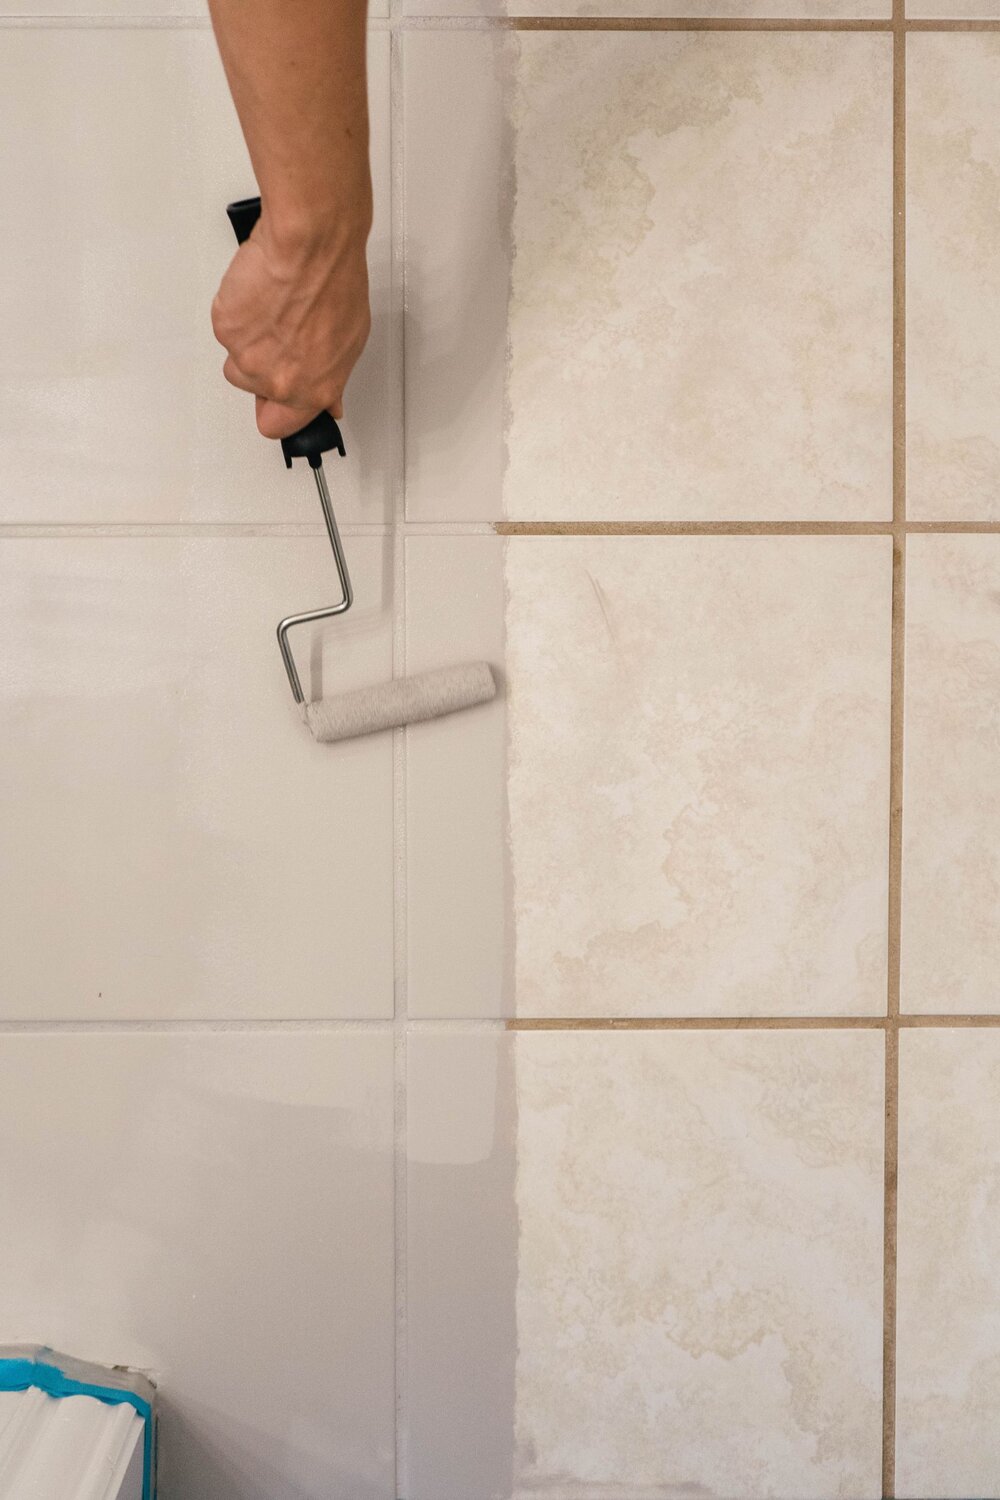 Diy How To Paint Ceramic Floor Tile, Can You Stain Ceramic Tile Floor